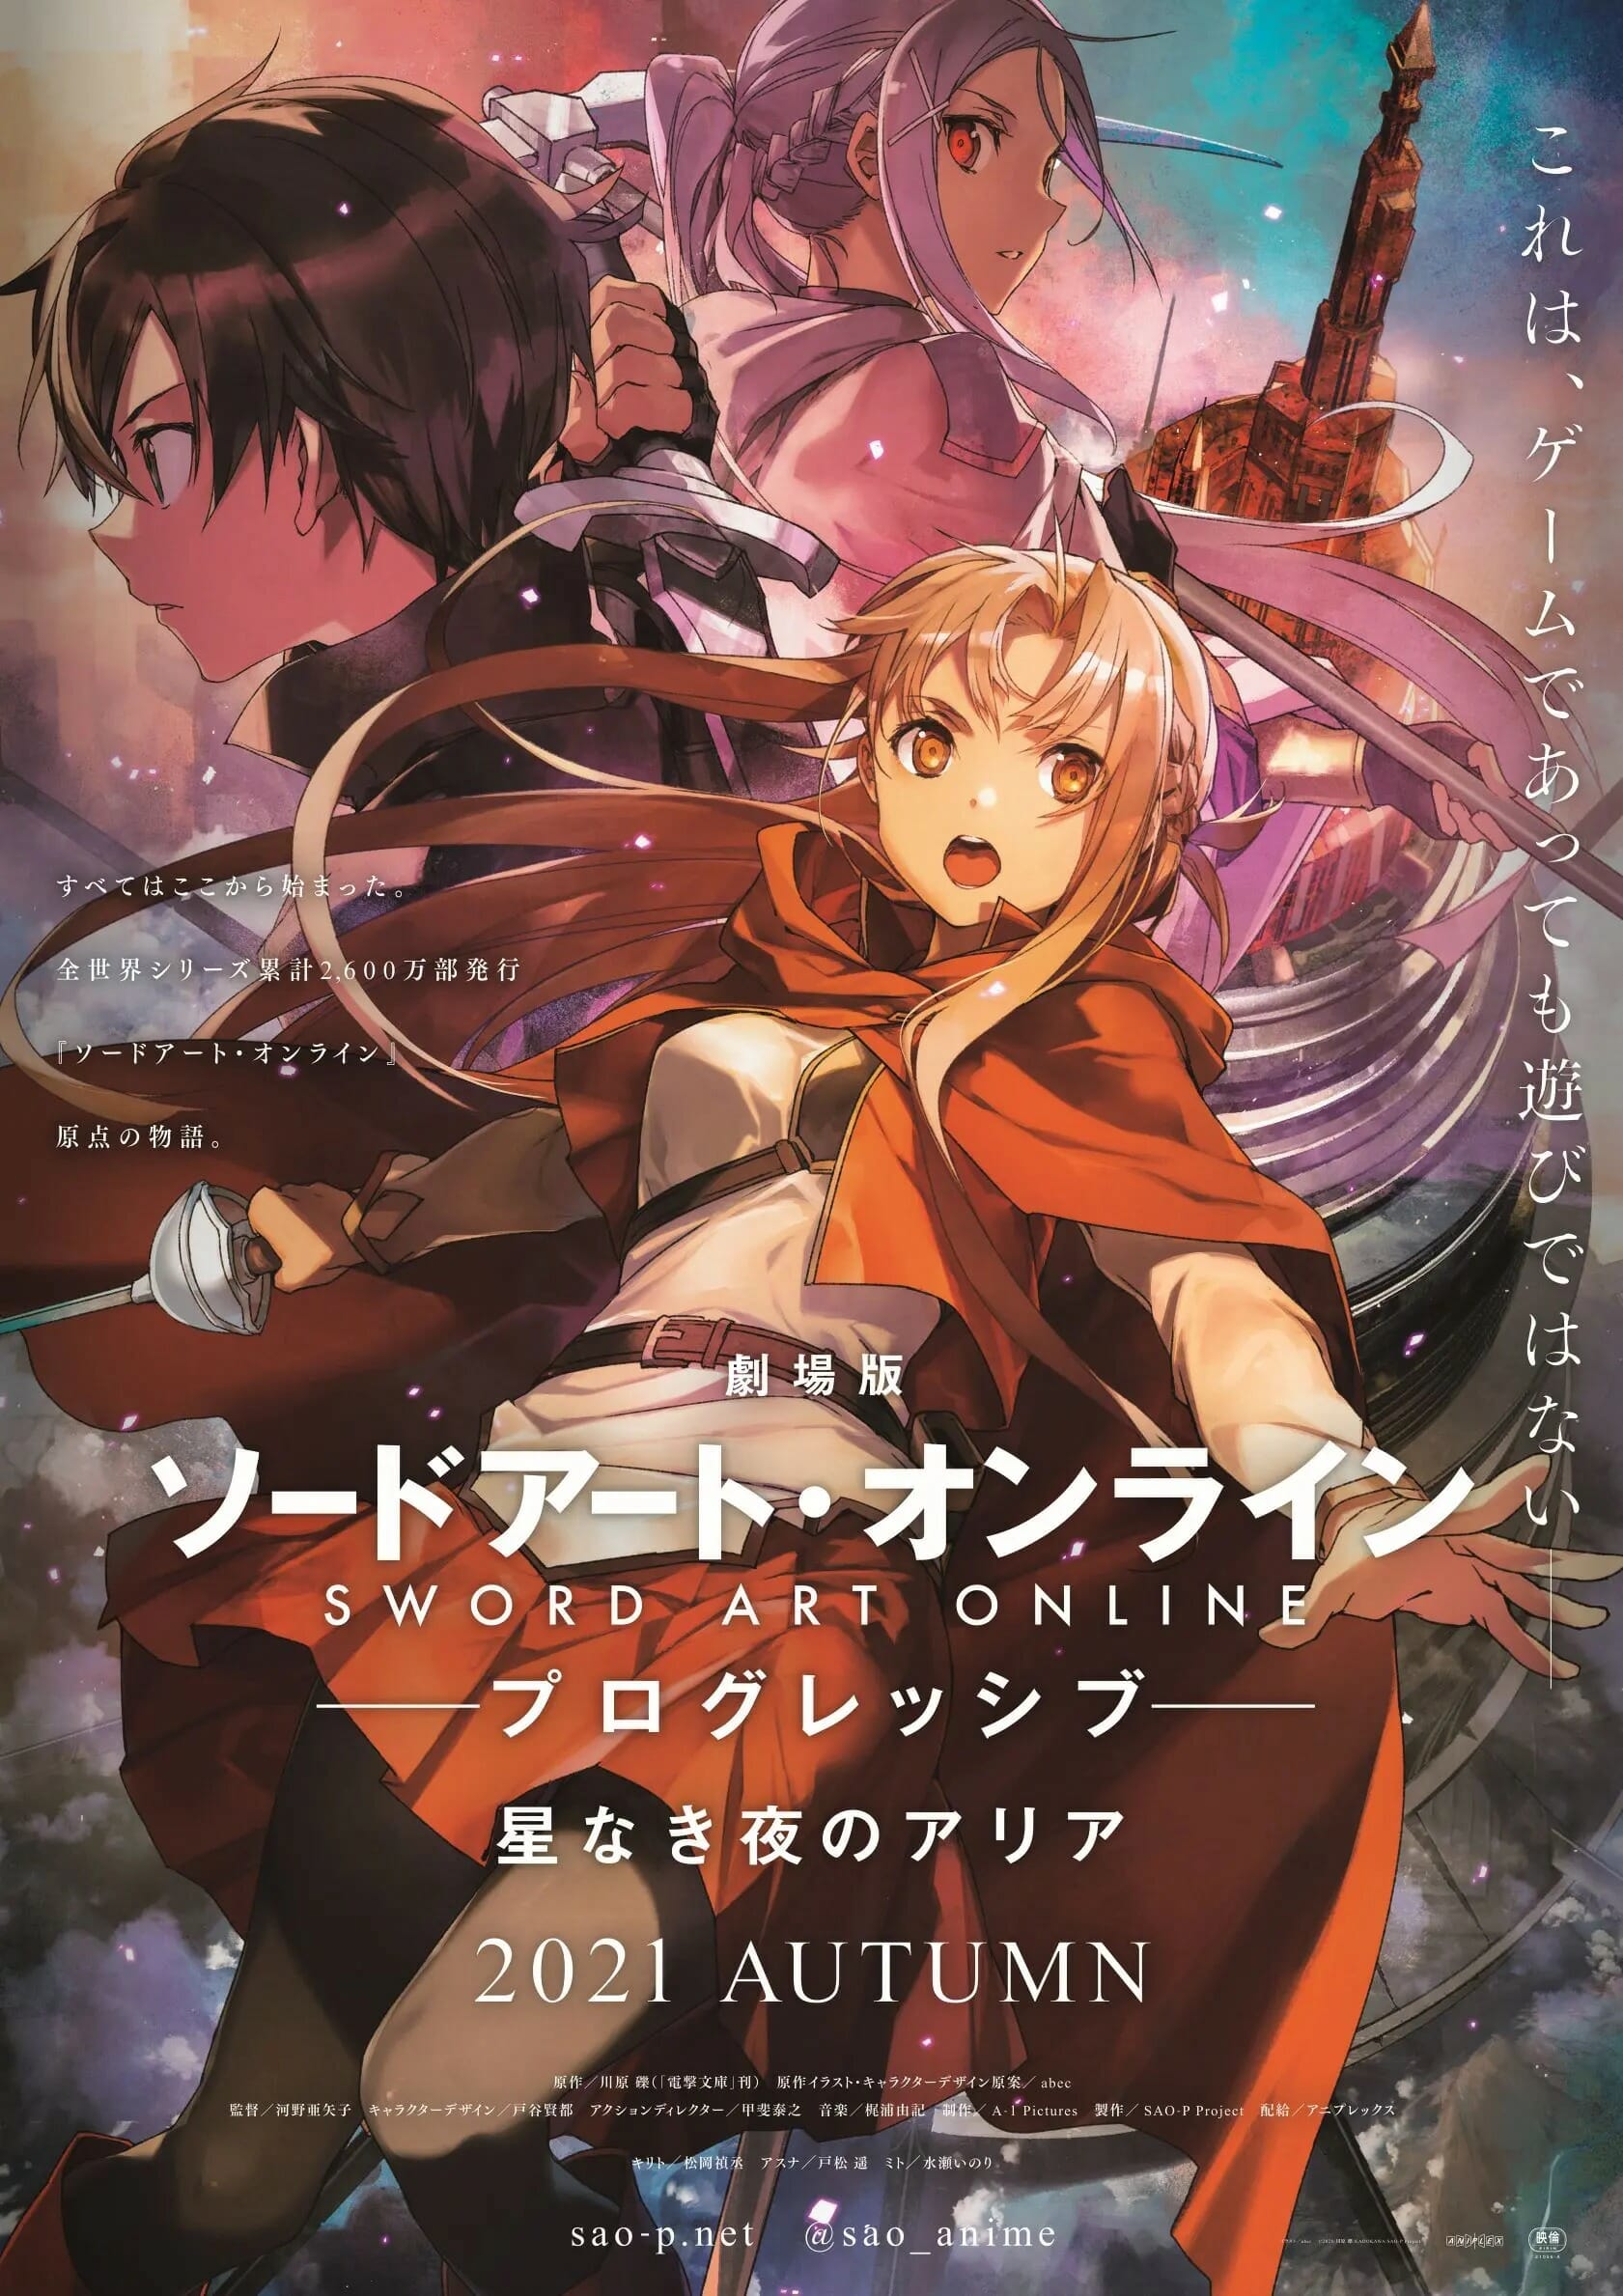 Theatrical Version of Sword Art Online will be released in 2022! The  subtitle is Scherzo of the Dark Dusk 